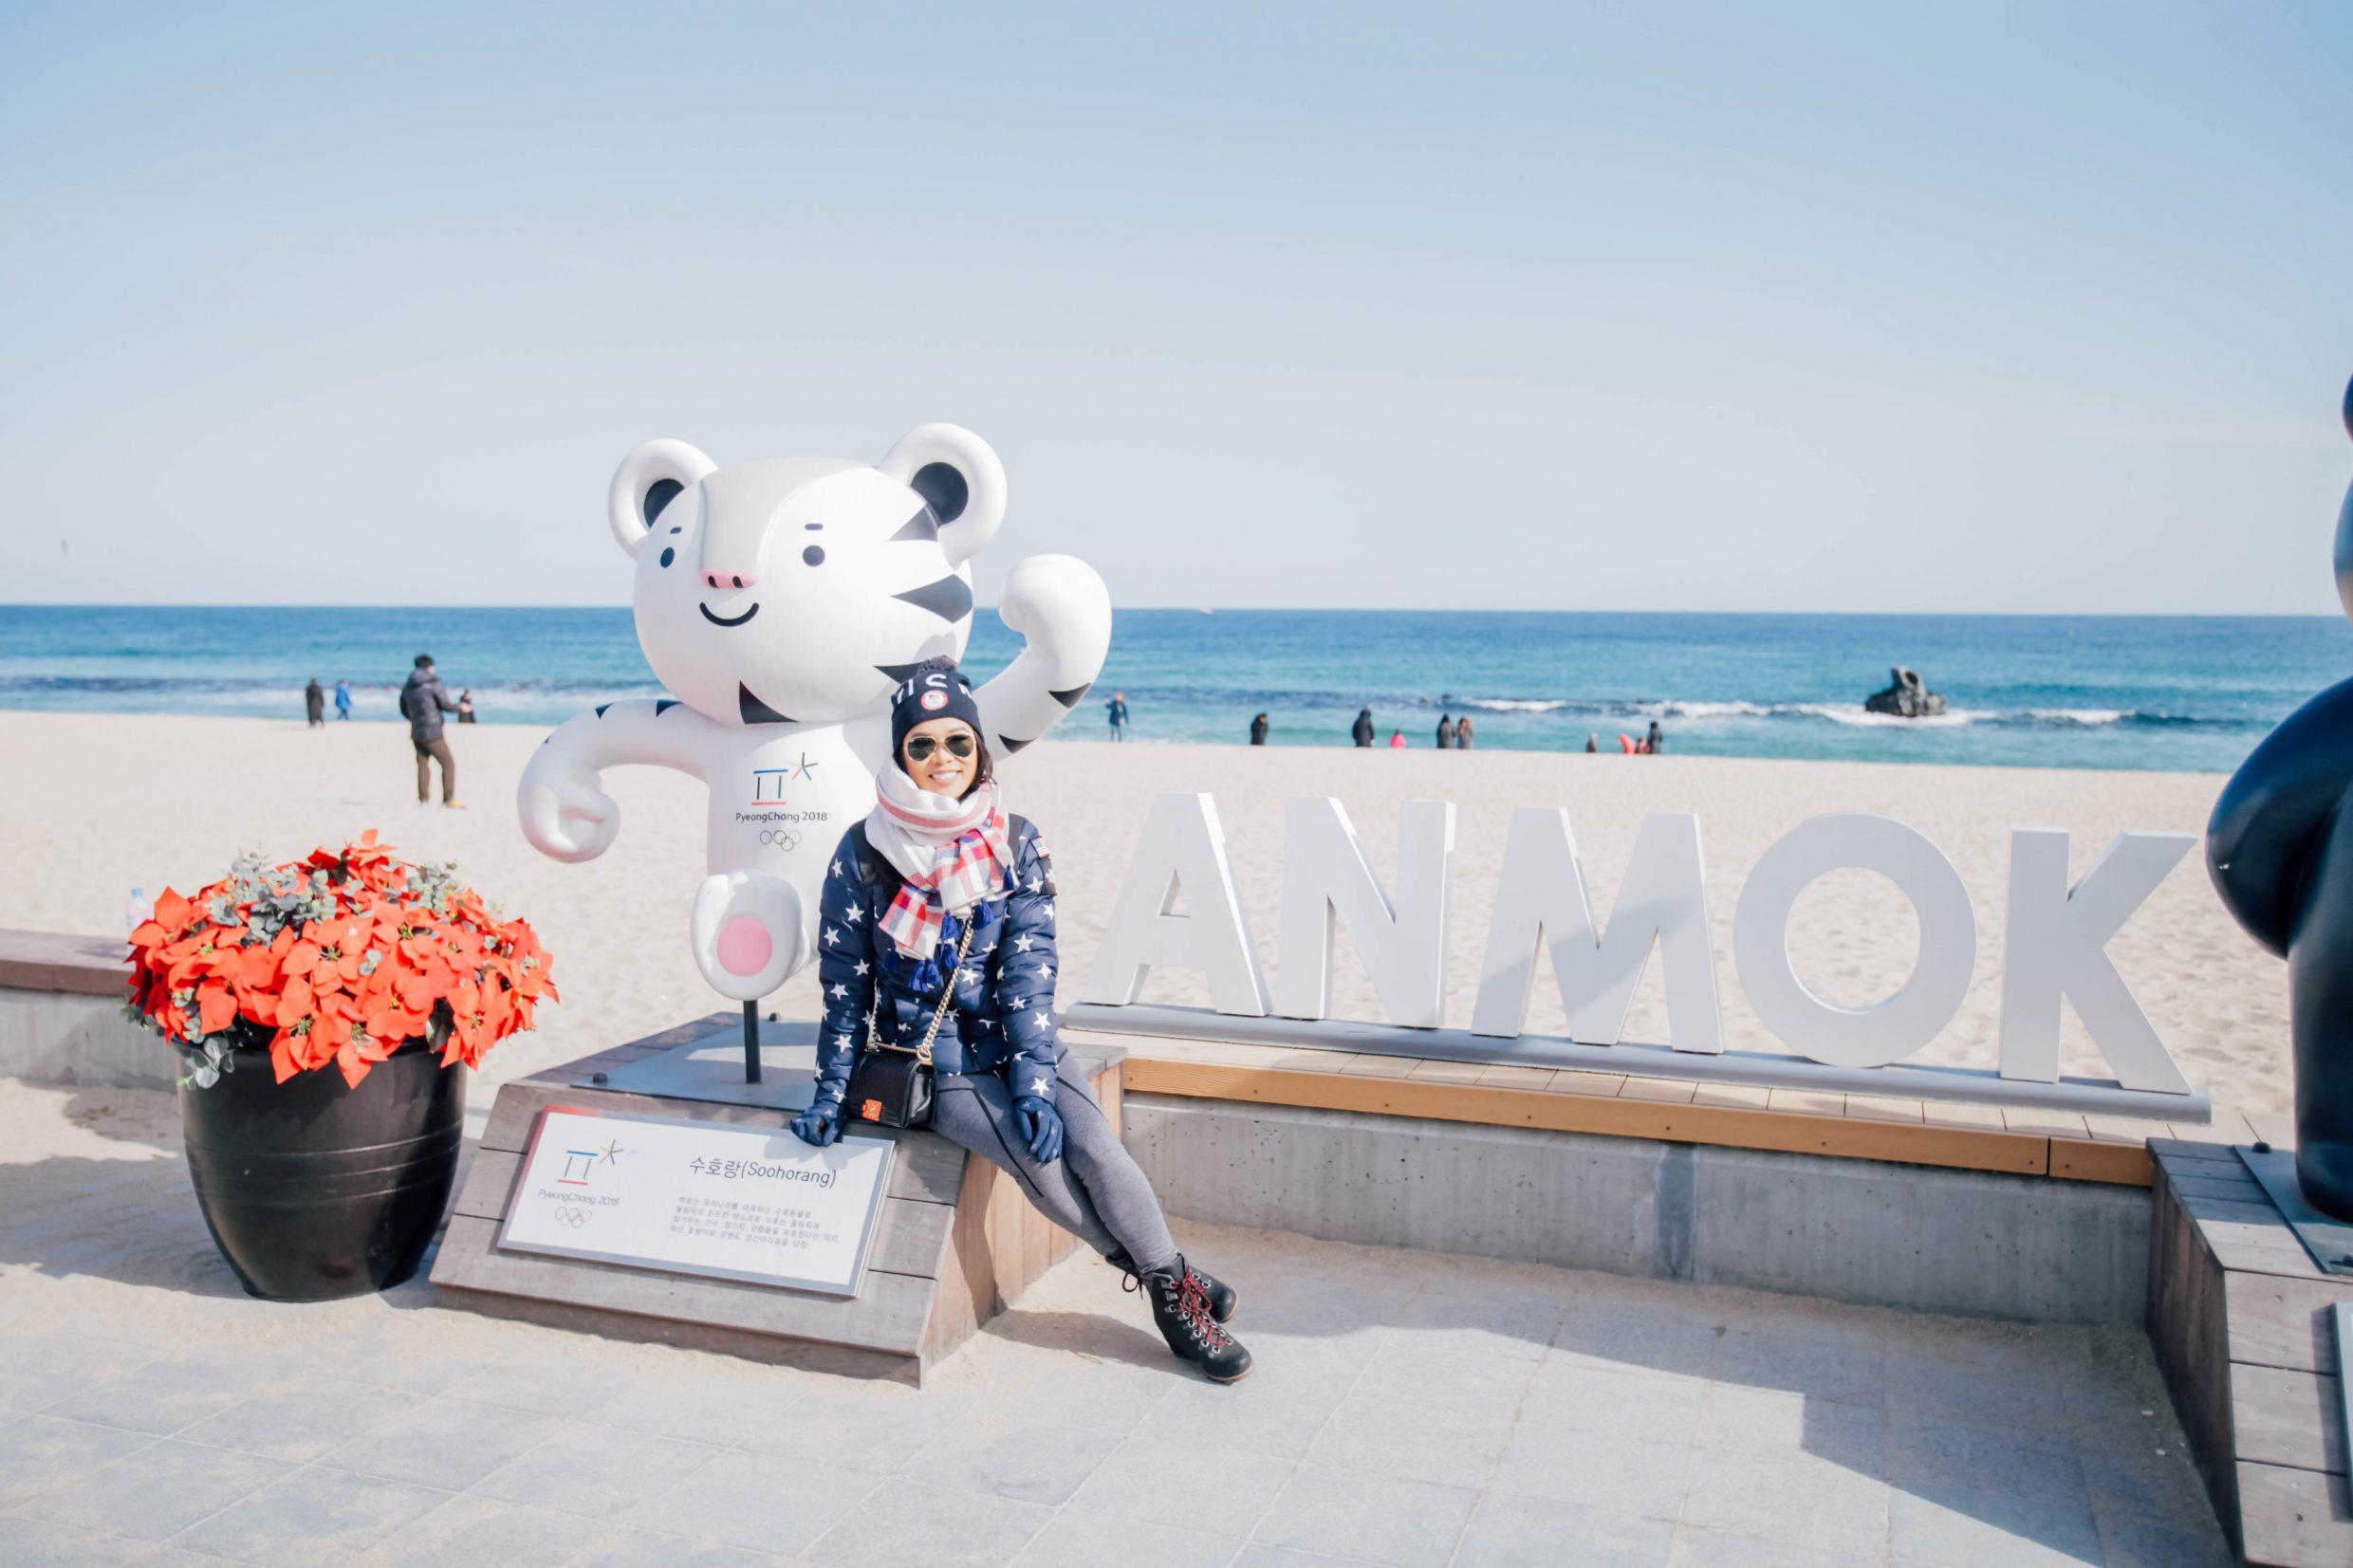 Hoang-Kim wearing The North Face Star Print Jacket and Sorel Conquest Wedge Boots at Anmok Beach during the PyeongChang 2018 Winter Olympics